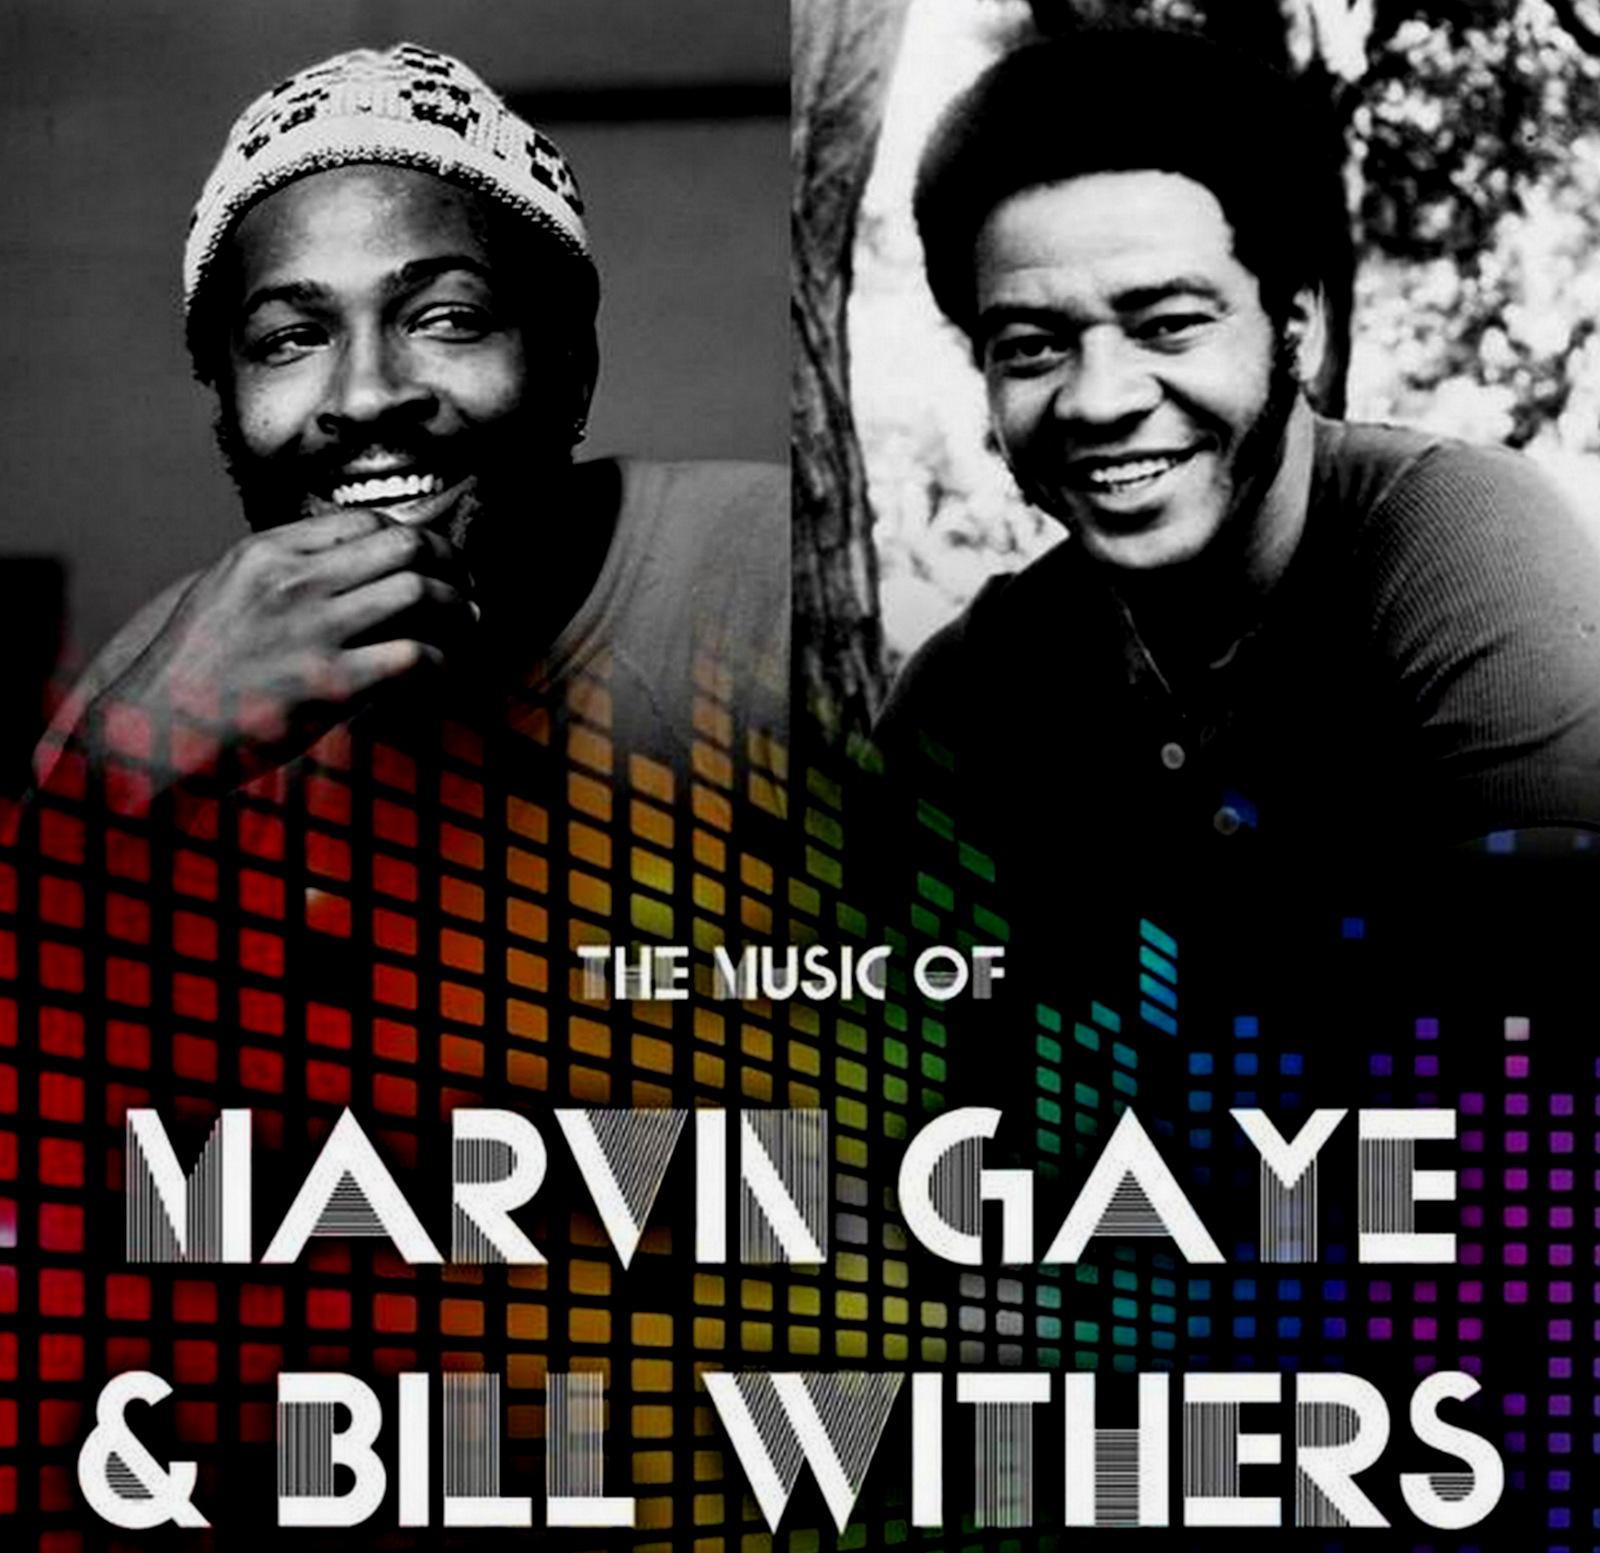 The Music of MARVIN GAYE & BILL WITHERS